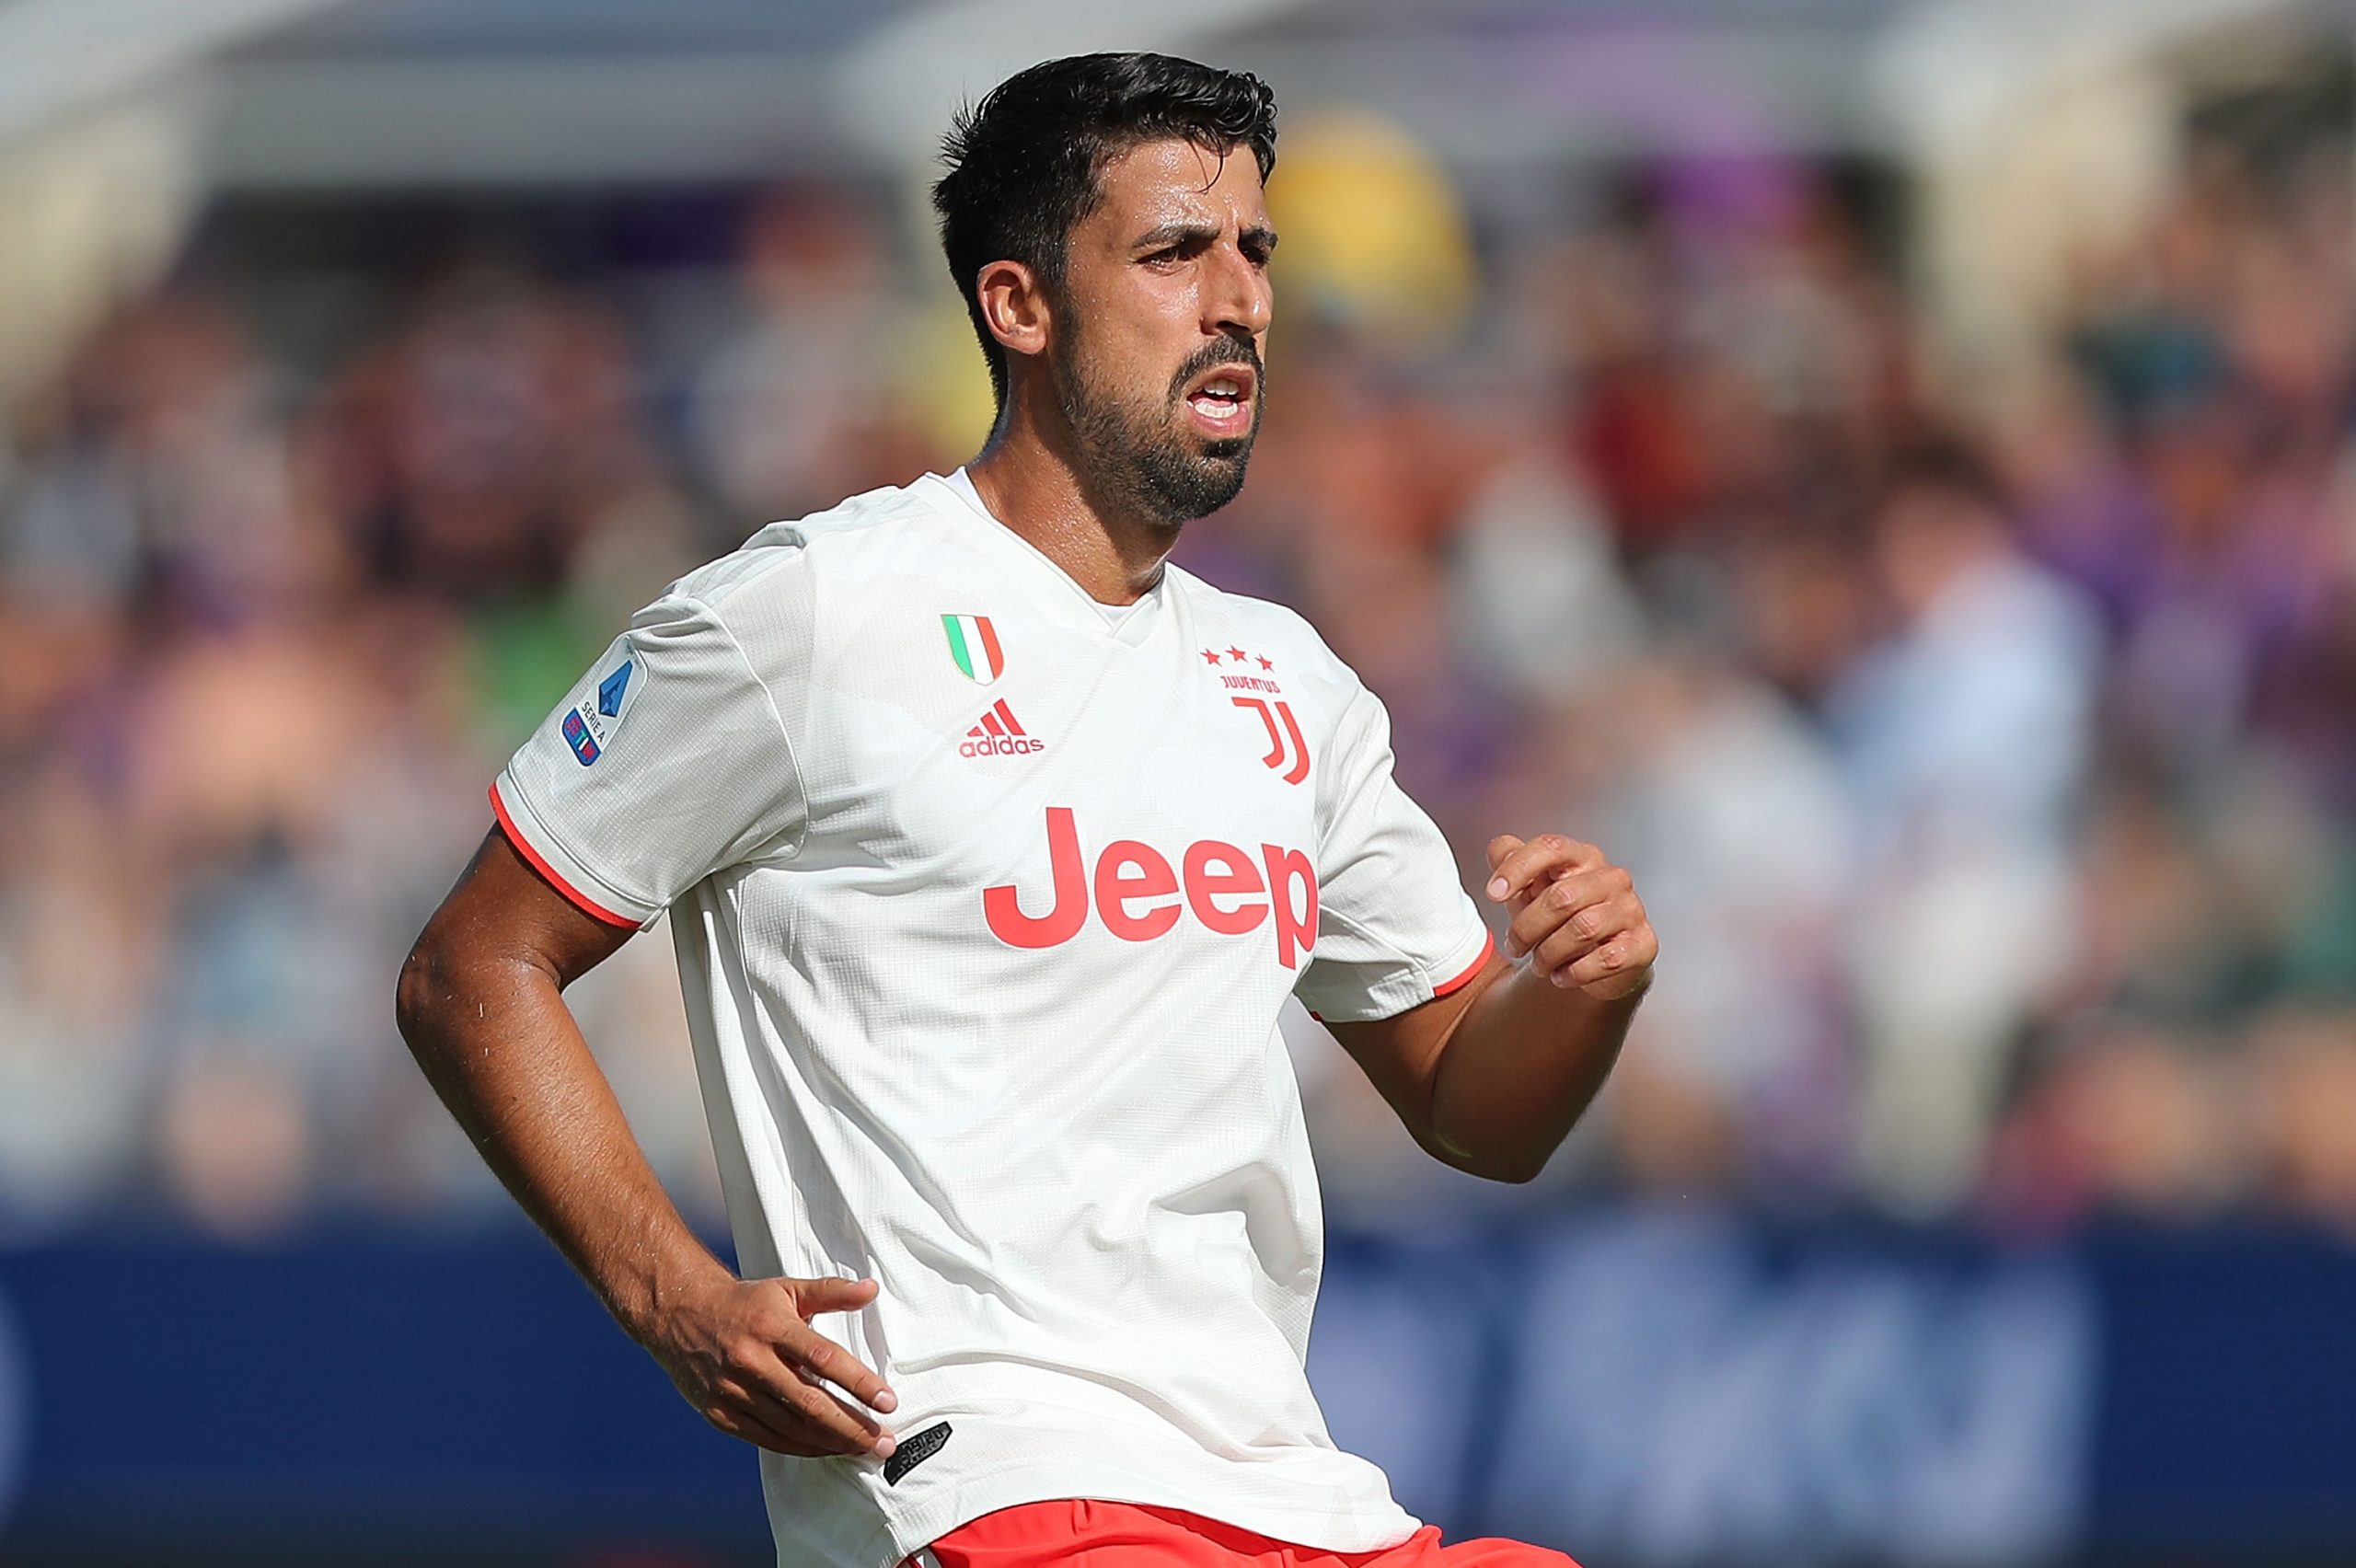 Everton willing to take a chance on Sami Khedira who is seen in the picture